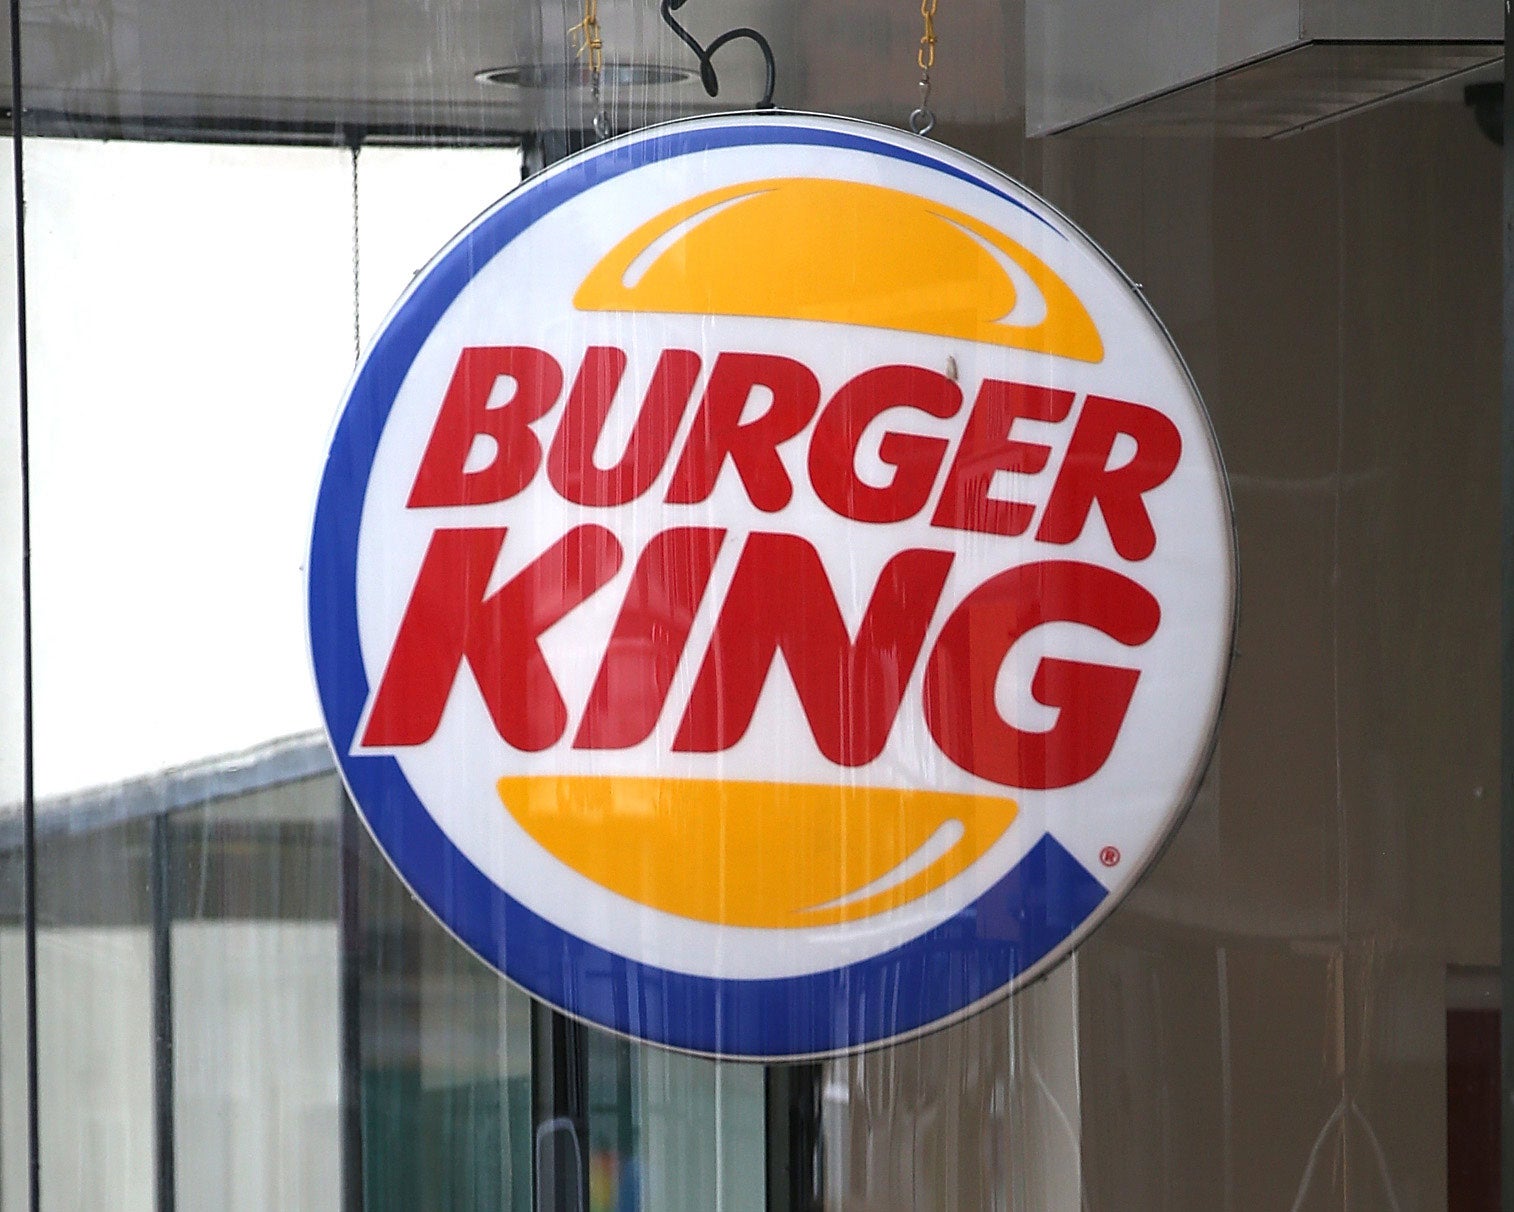 In the last three months of 2016, Restaurant Brands International has opened 495 Burger King locations globally, ending the year with 15,738 stores